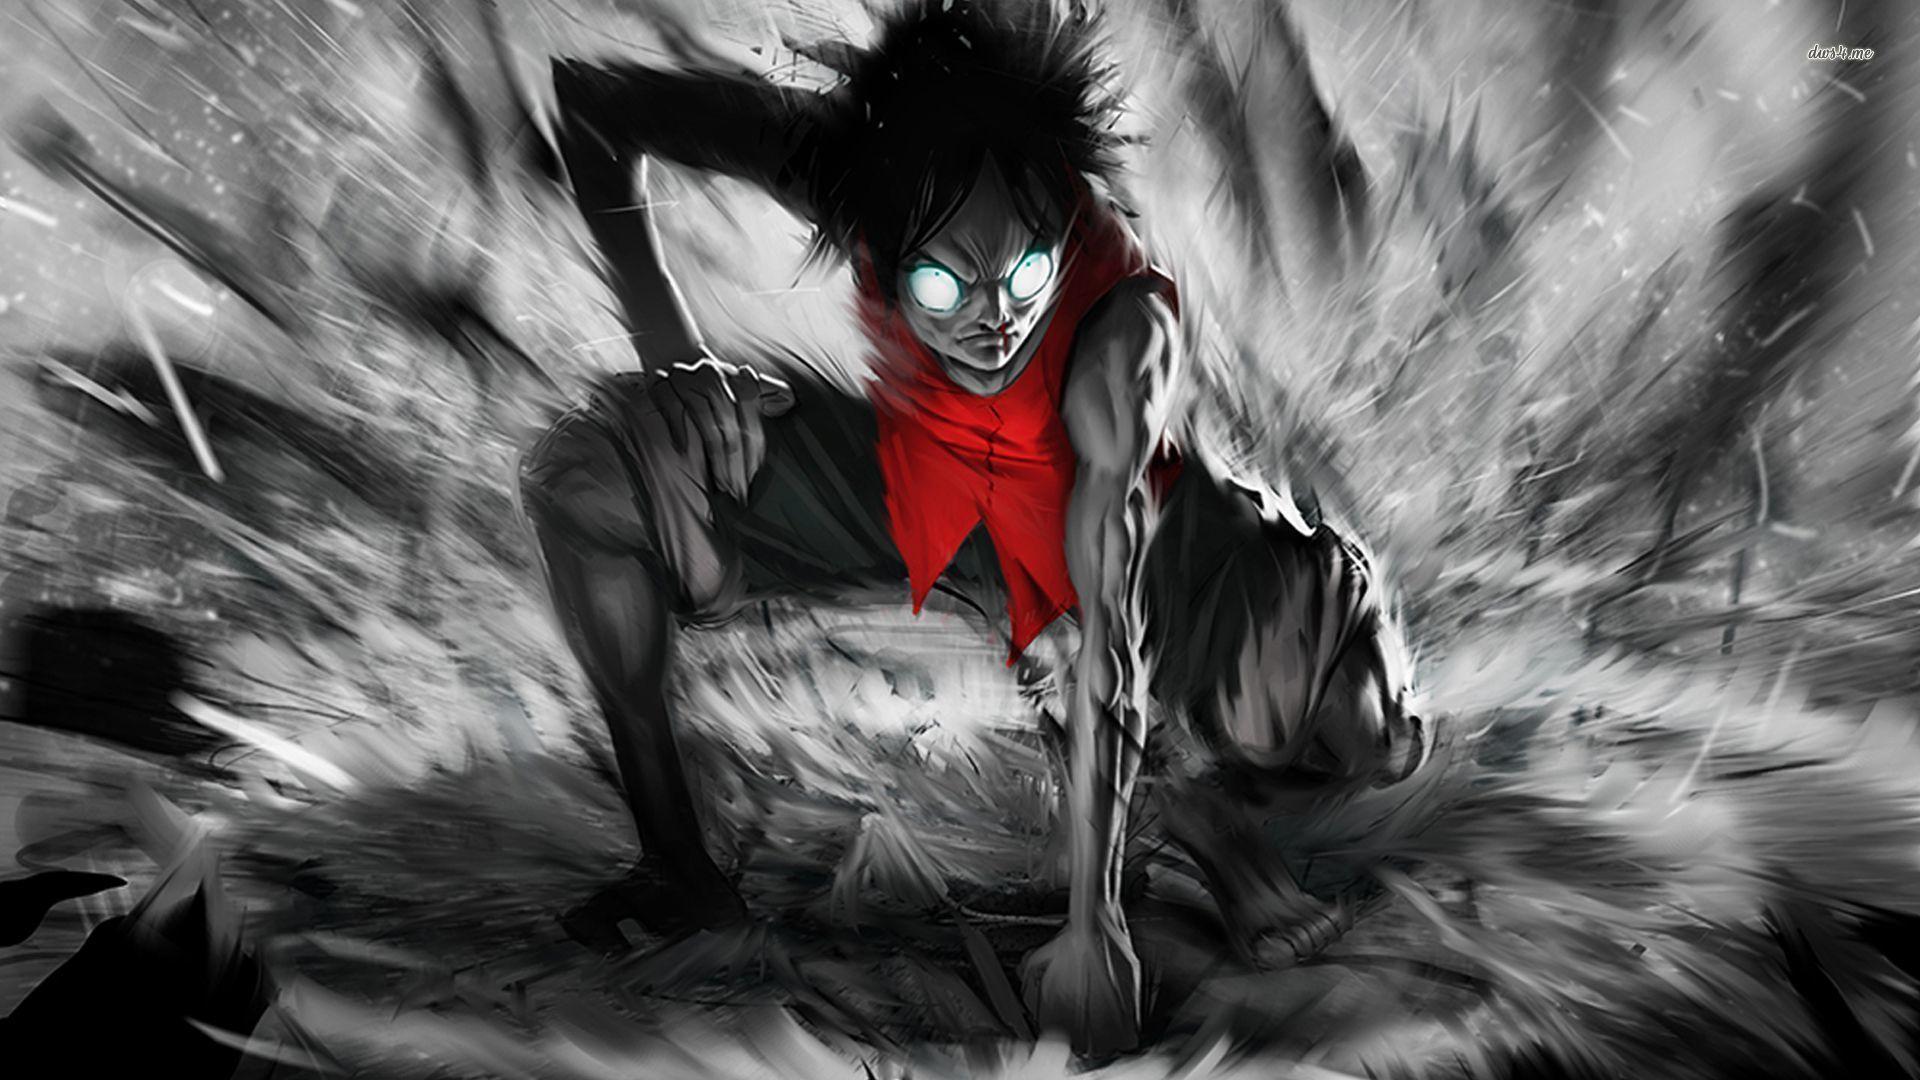 Scary Monkey D Luffy One Piece 1920×1080 Anime Wallpaper. One